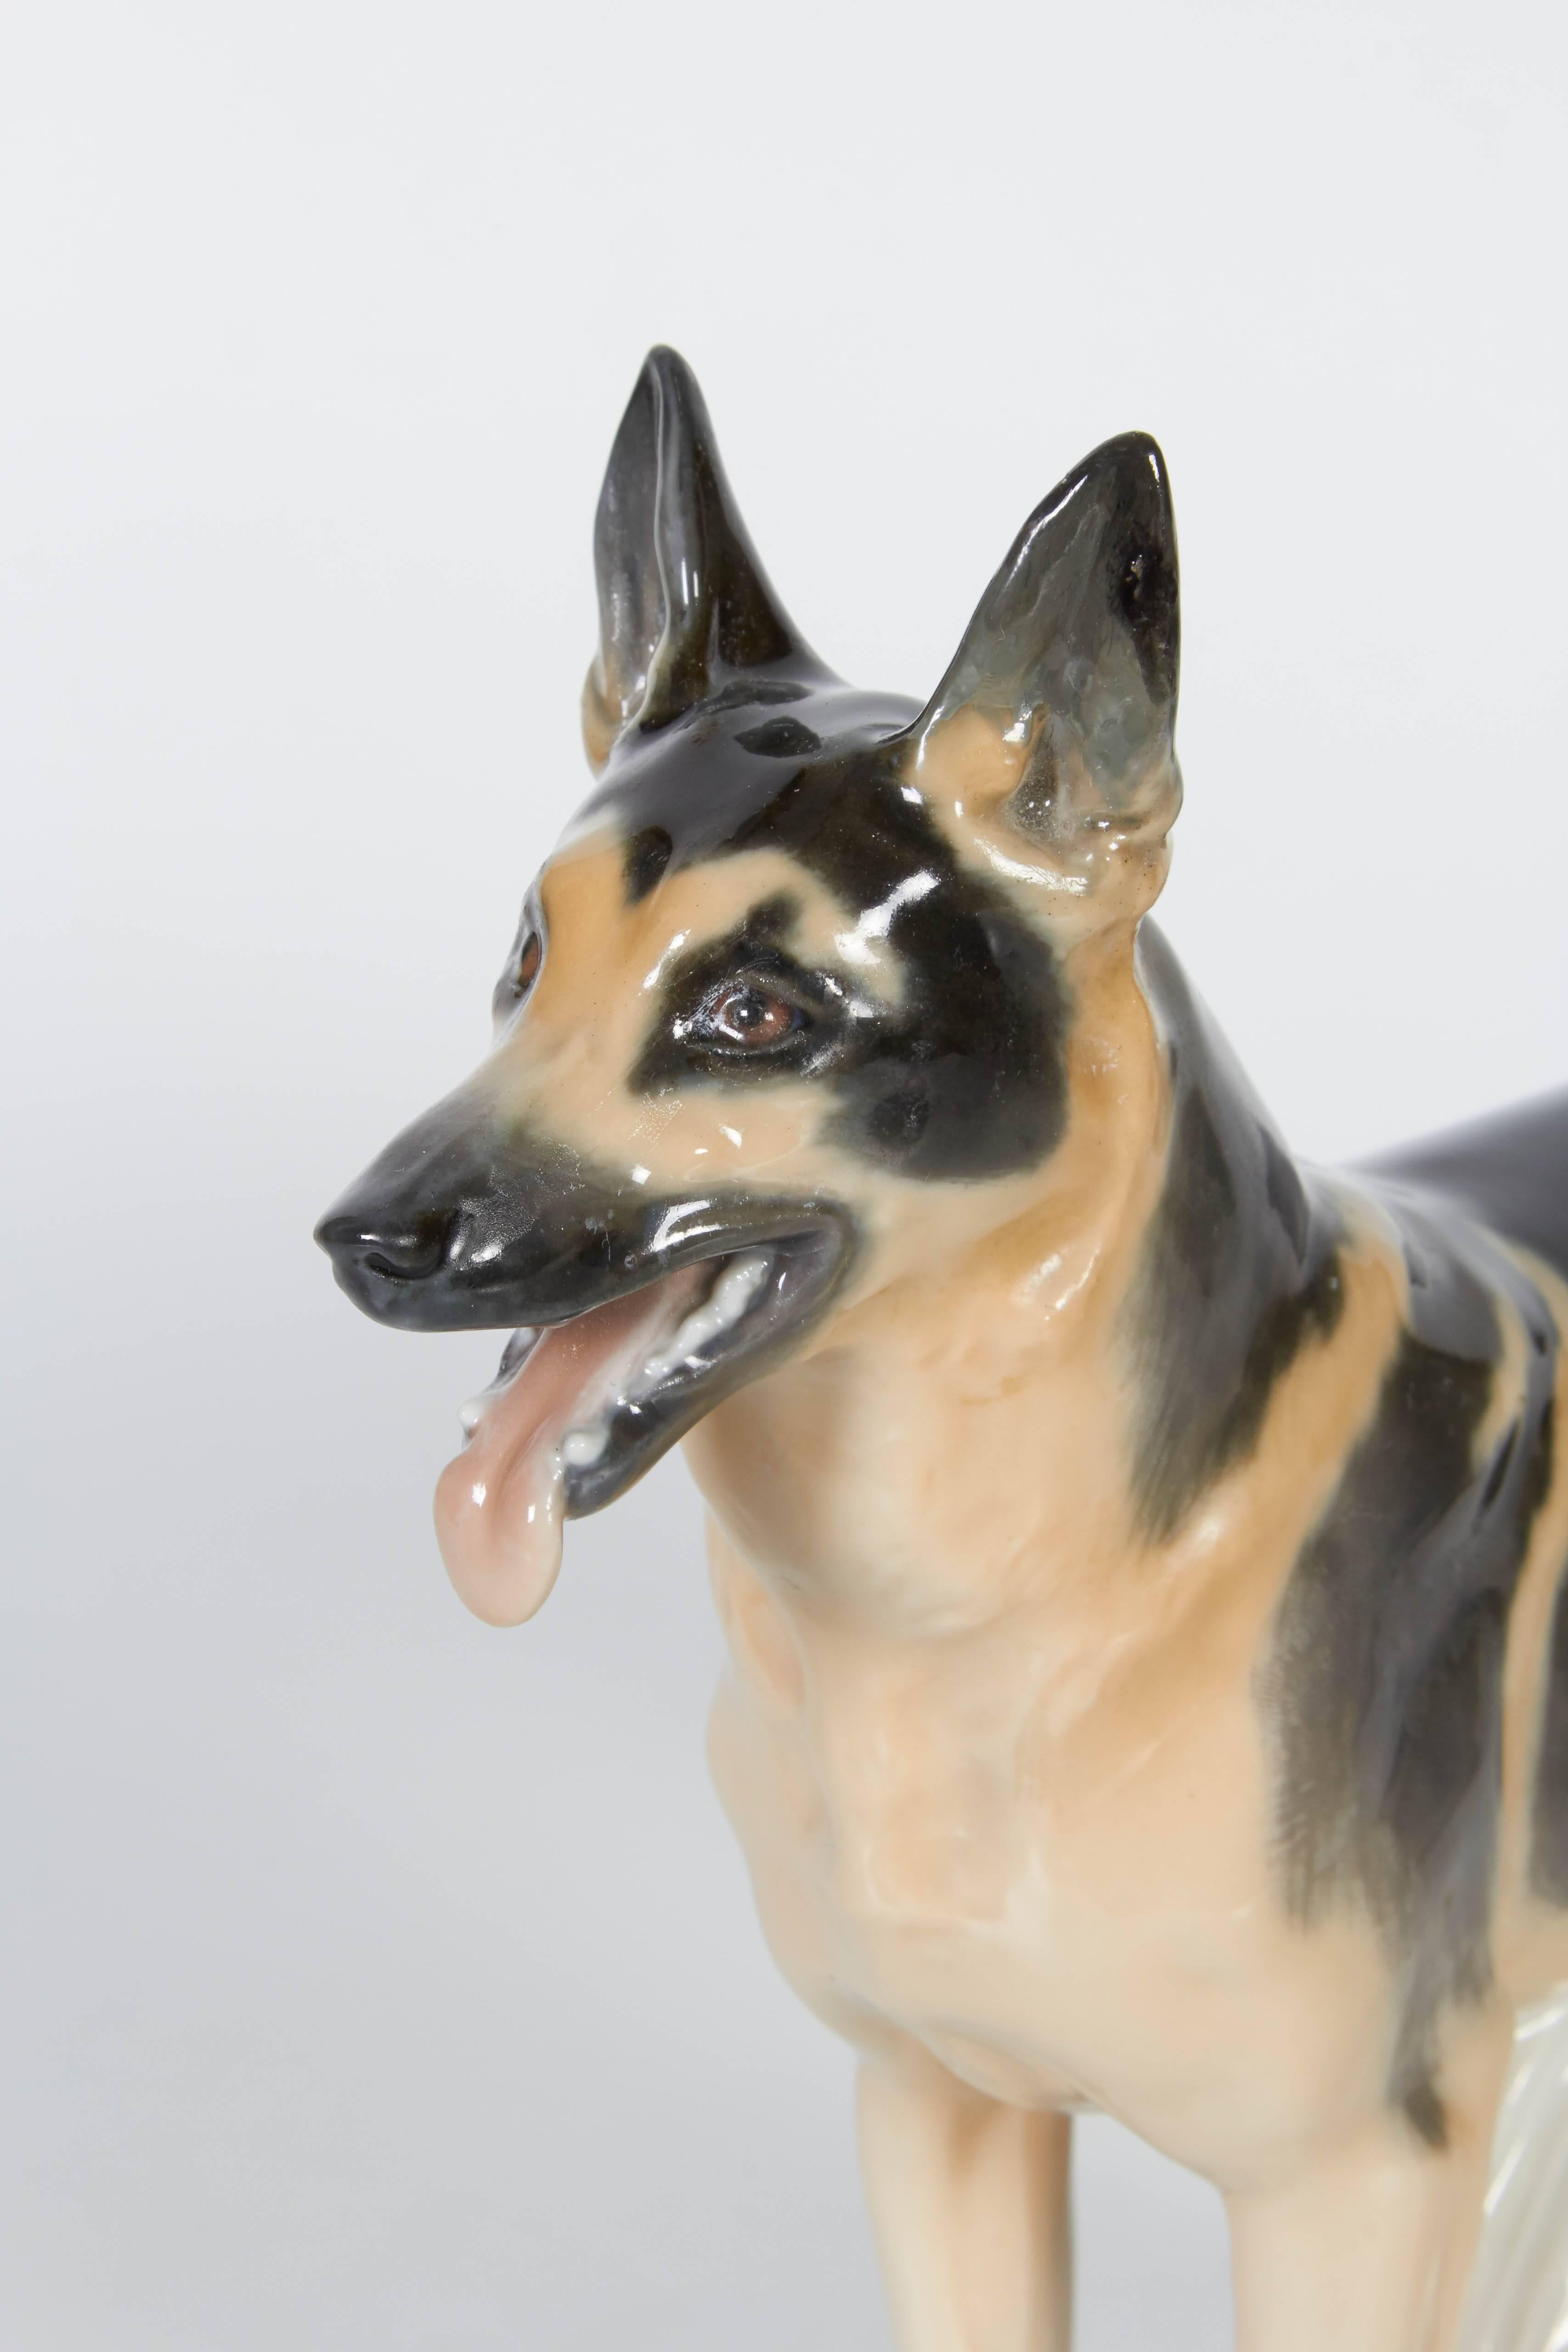 An exquisitely crafted Meissen Porcelain figure of a German Shepherd dog from the sought after Pfeiffer Period. hand-painted underglaze in black and brown, bearing the famous blue cross underglaze mark, this piece is a collector’s item, circa